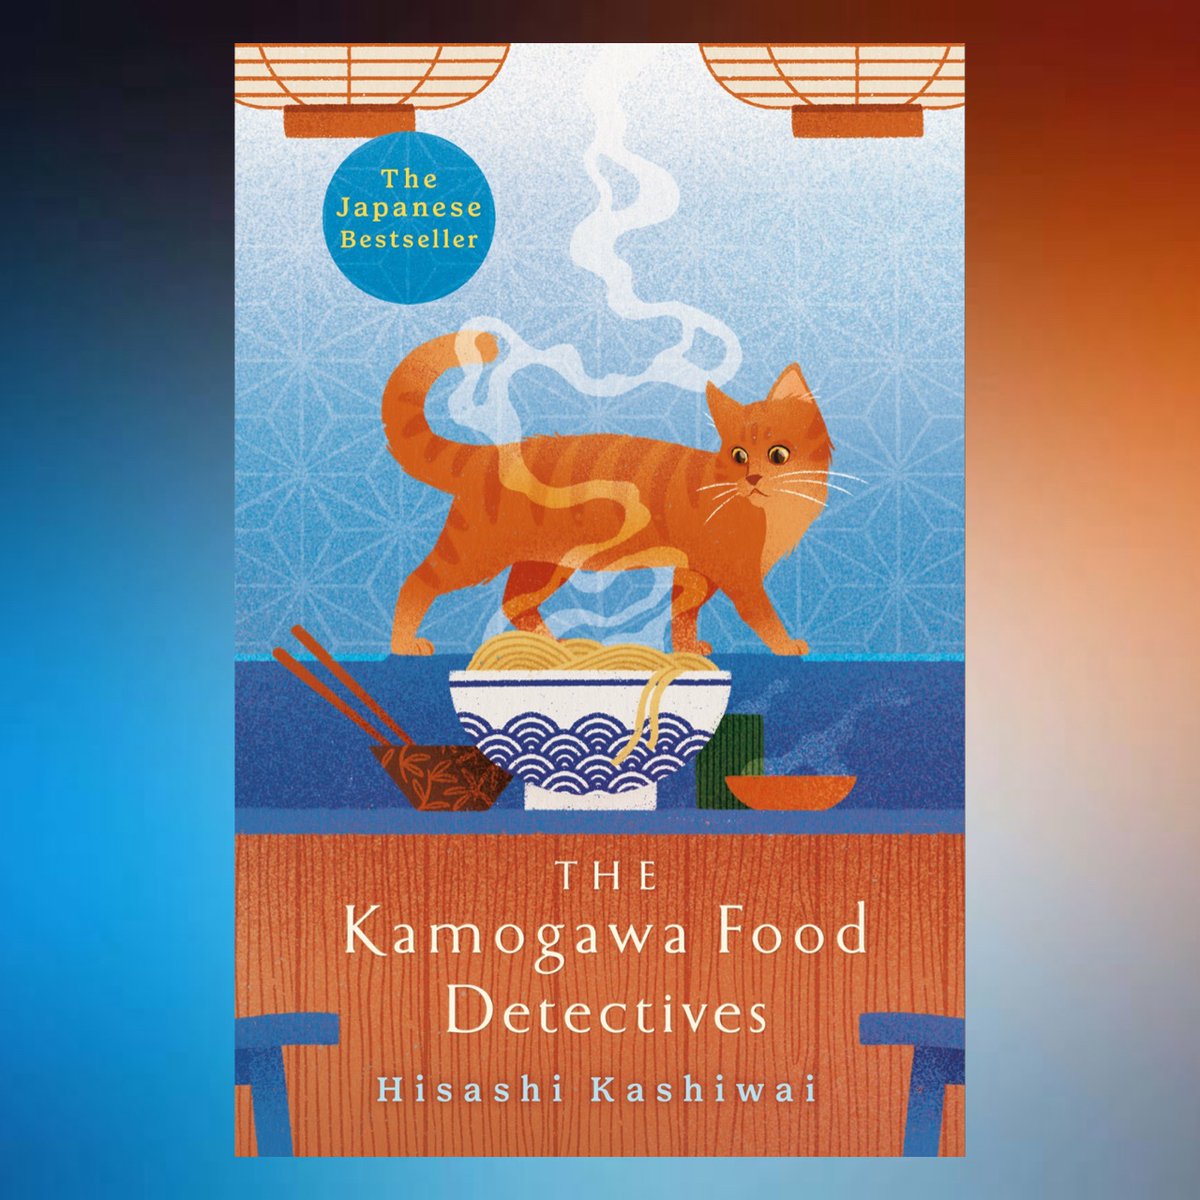 Today's #BookMail is The Kamogawa Food Detectives by Hisashi Kashiwai. 

What’s the one dish you’d do anything to taste just one more time? 

Thank you so much, @MacmillanAus!

#BookHaul #TheKamogawaFoodDetectives #HisashiKashiwai